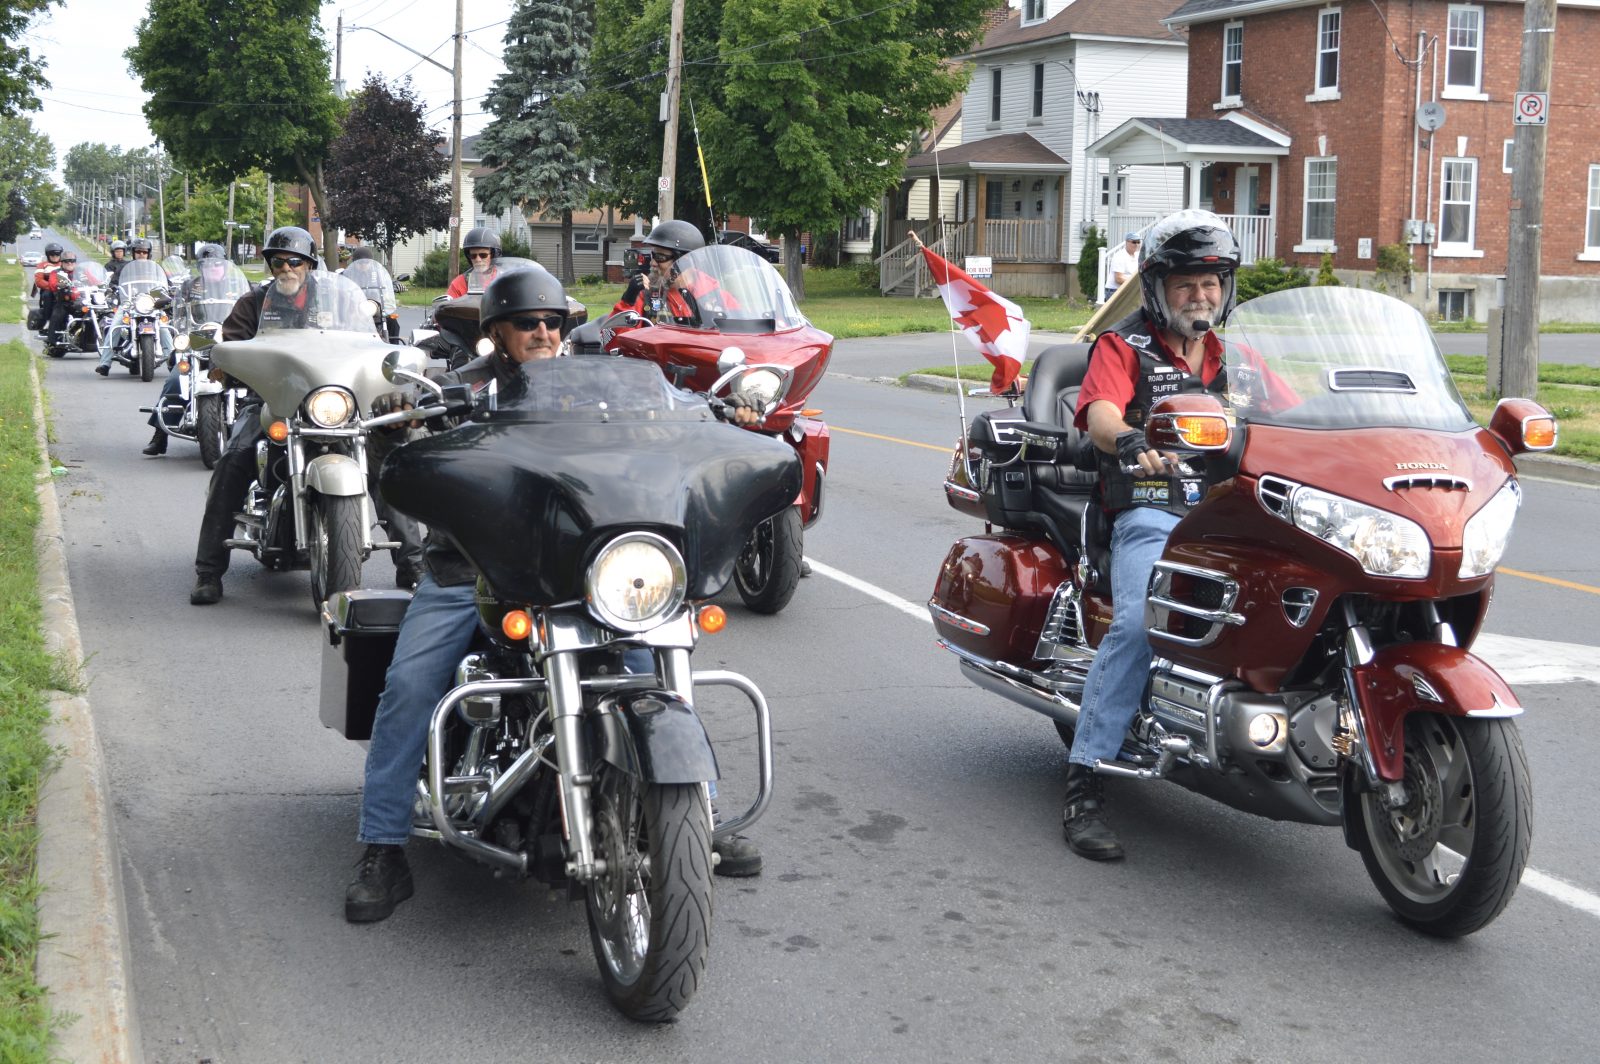 Motorcycle ride to support veterans